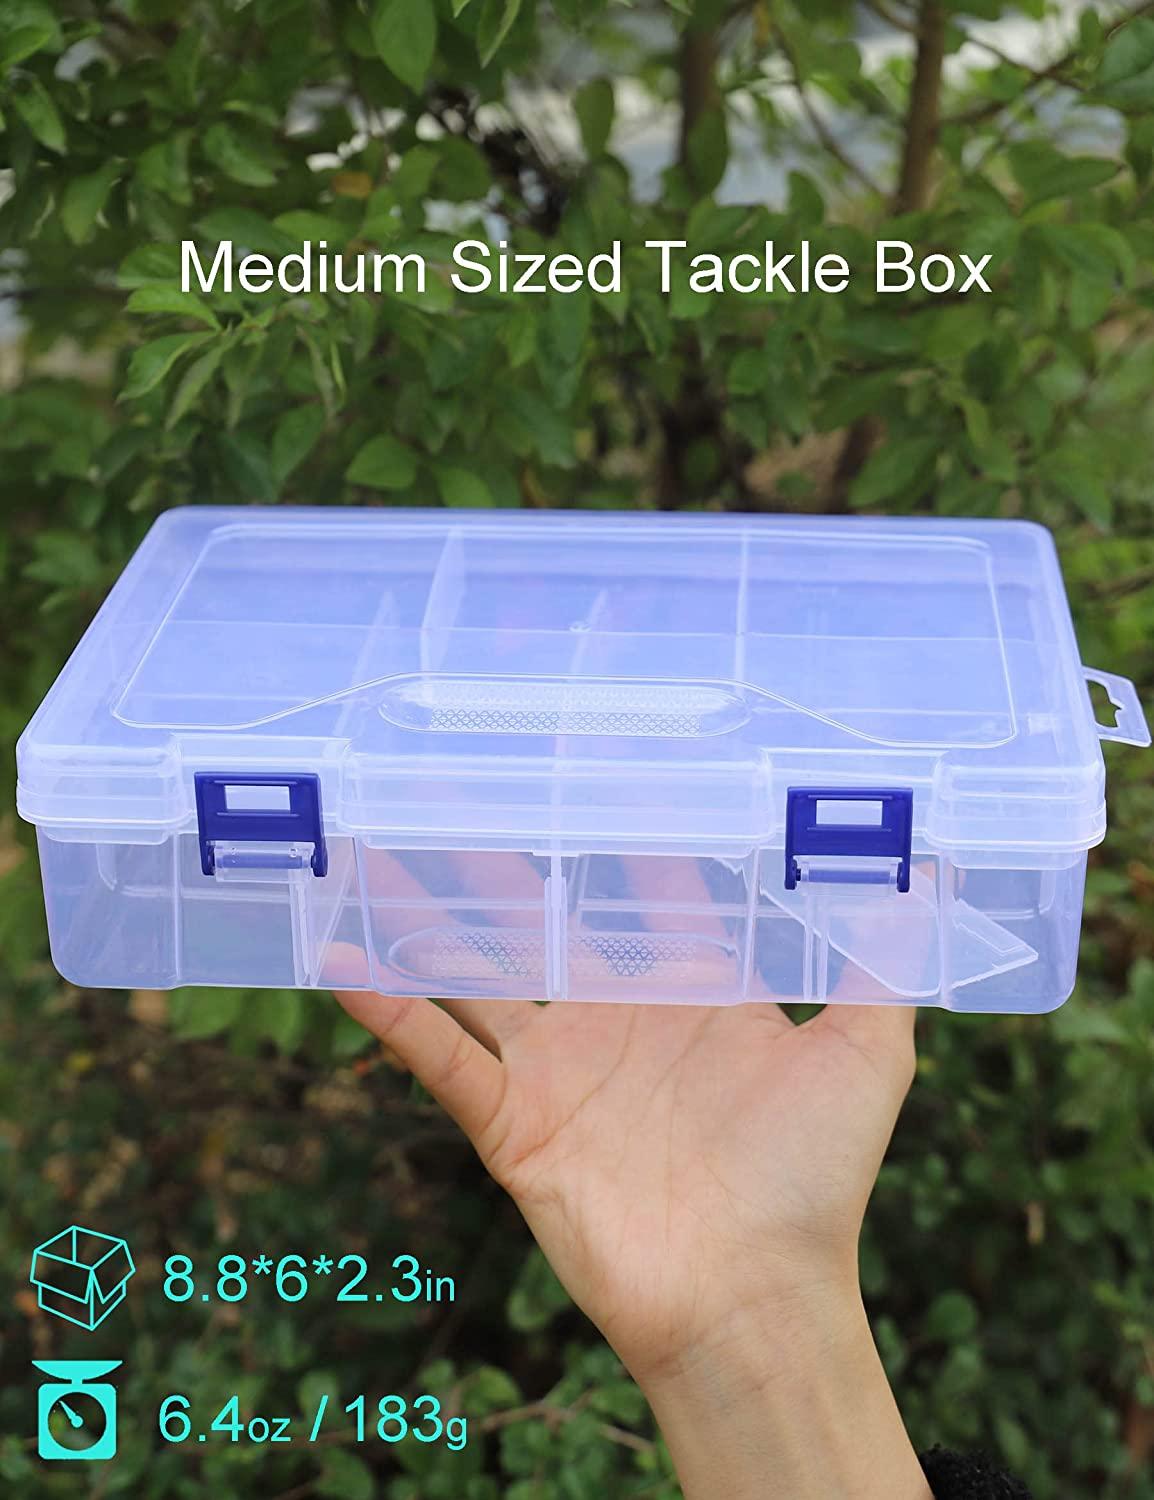 Avlcoaky Tackle Box Organizer Small 3500 Tackle Tray Plastic Organizer Box  with Dividers Snackle Box Container Small Tackle Boxes for Snacks Beads  Storage